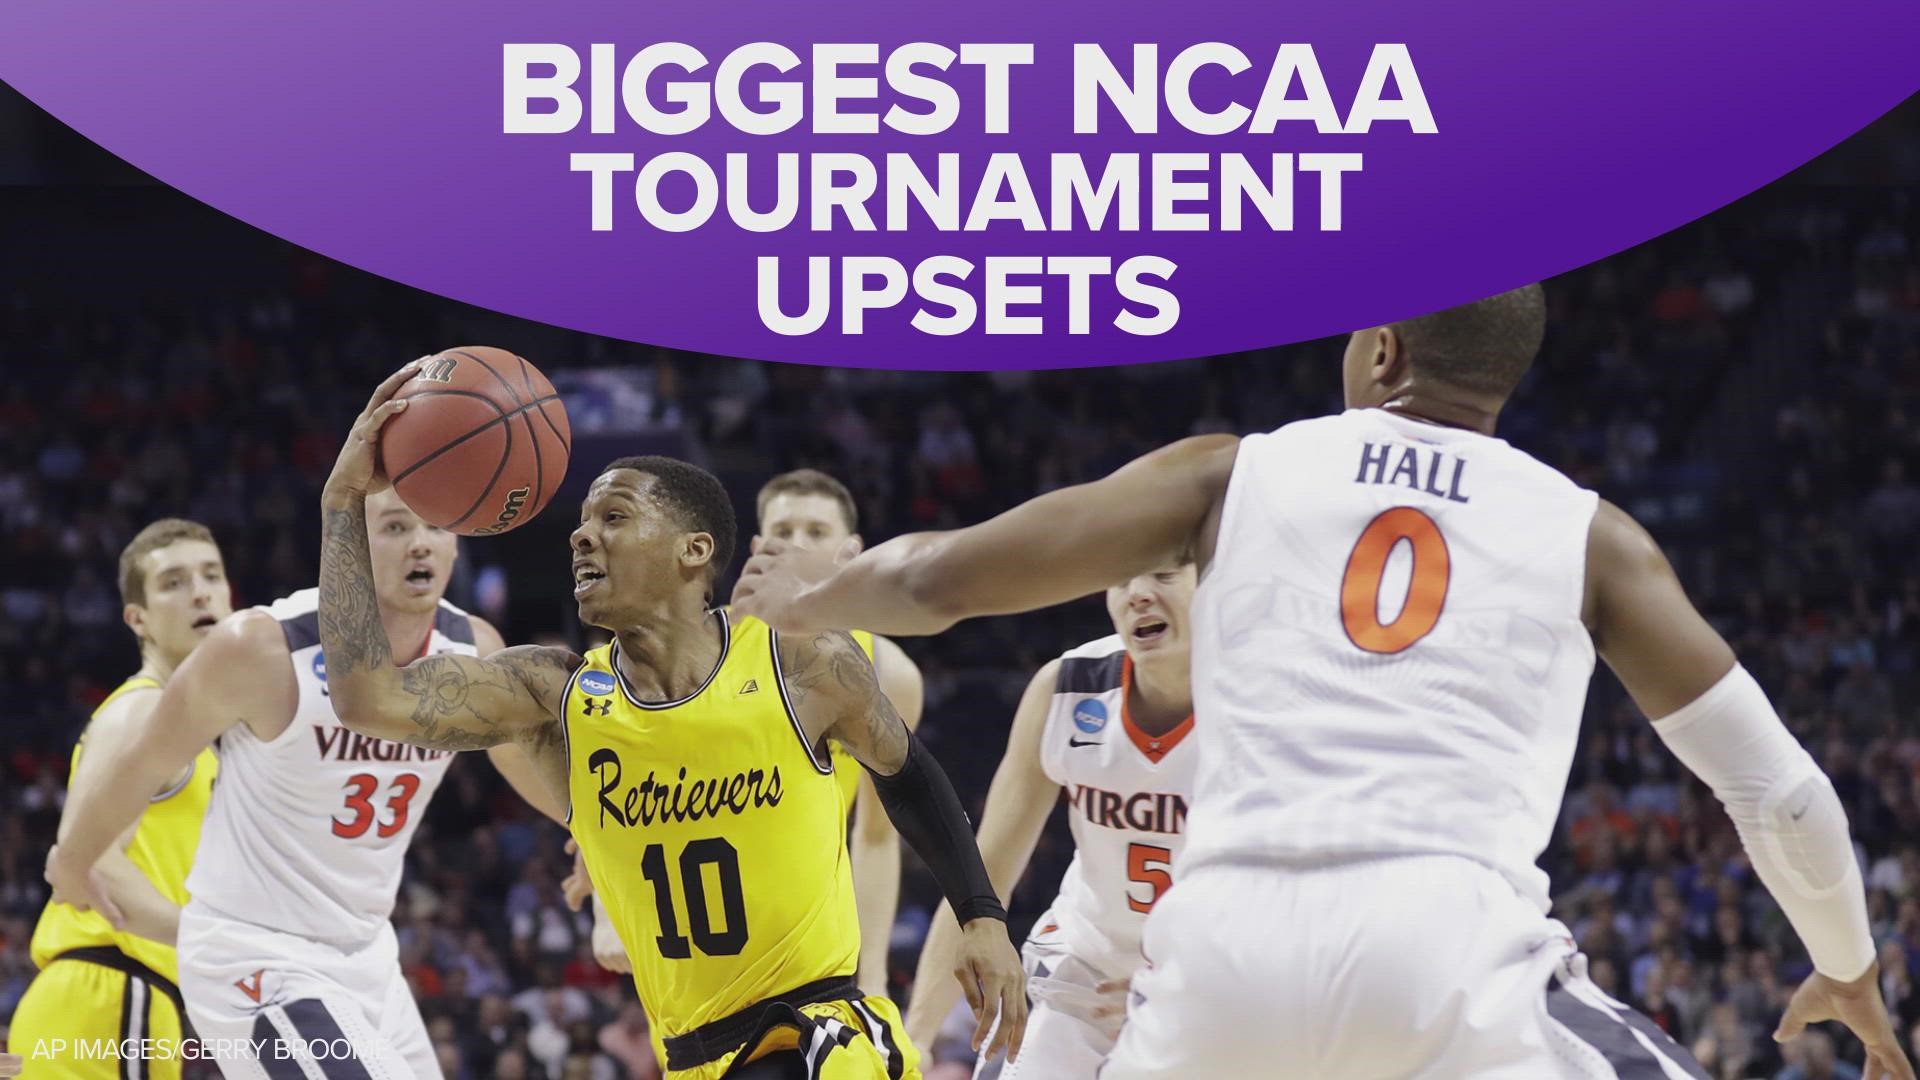 From a team that saw its 45-game winning streak end to the first No. 16 seed to beat a No. 1, here are some of the biggest NCAA tournament upsets.